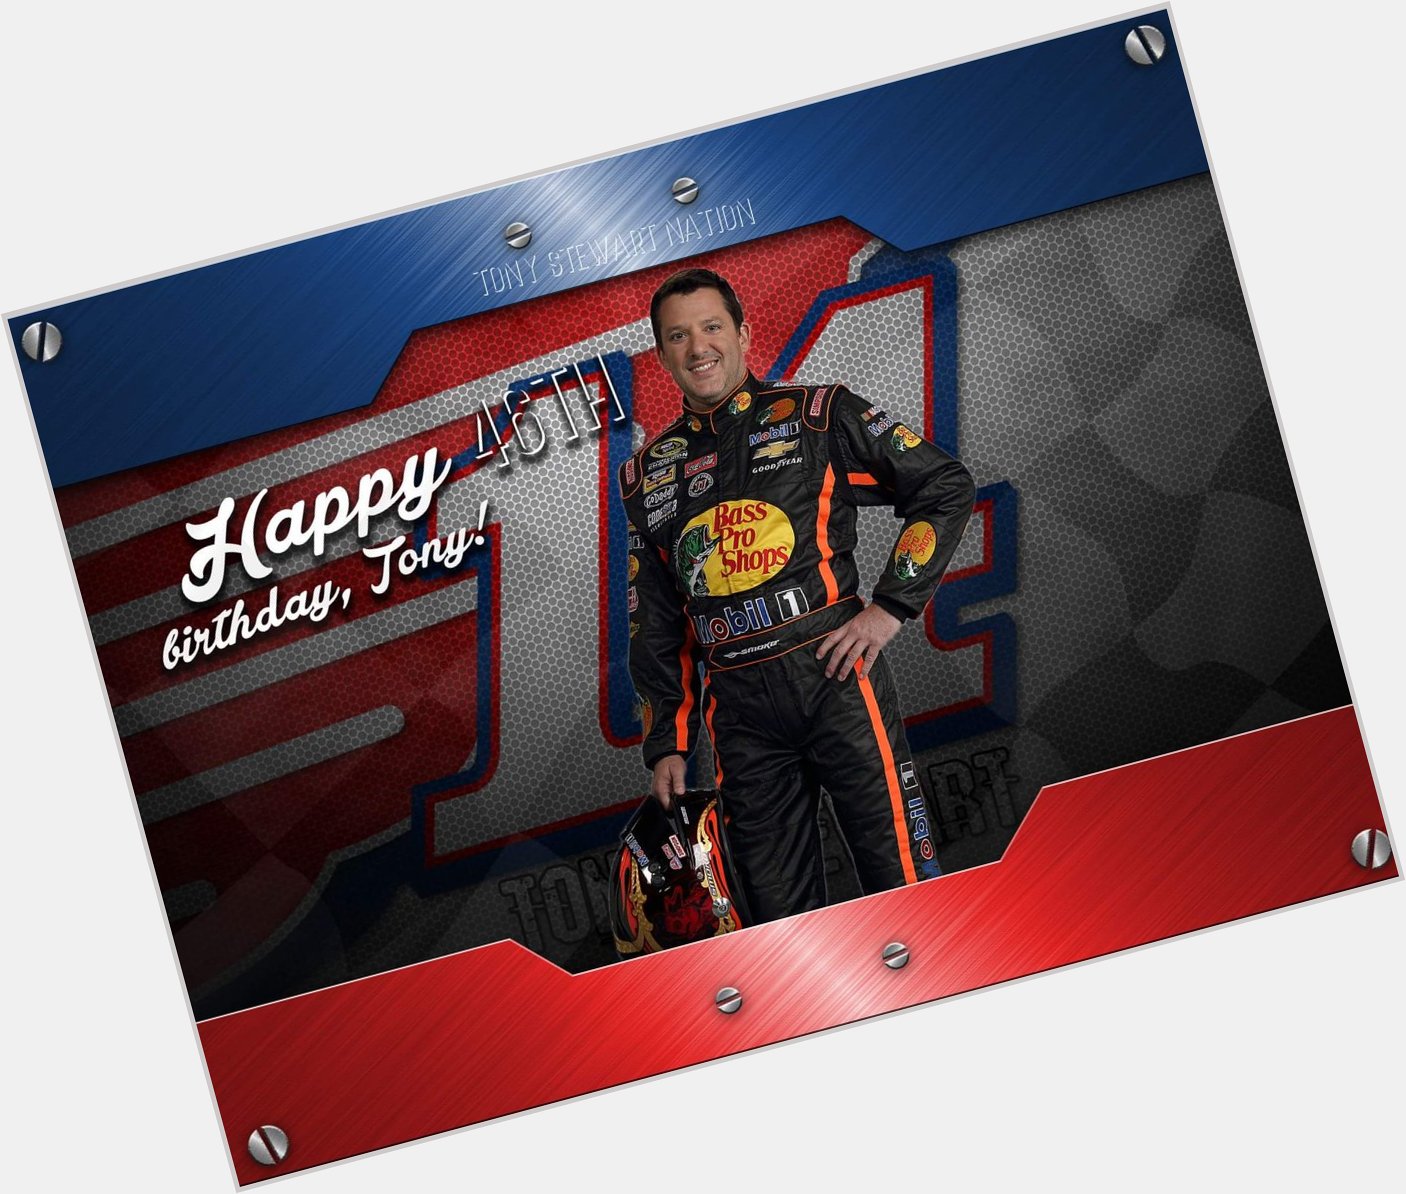 Join us in wishing our fearless leader, Tony Stewart, a very happy birthday!   